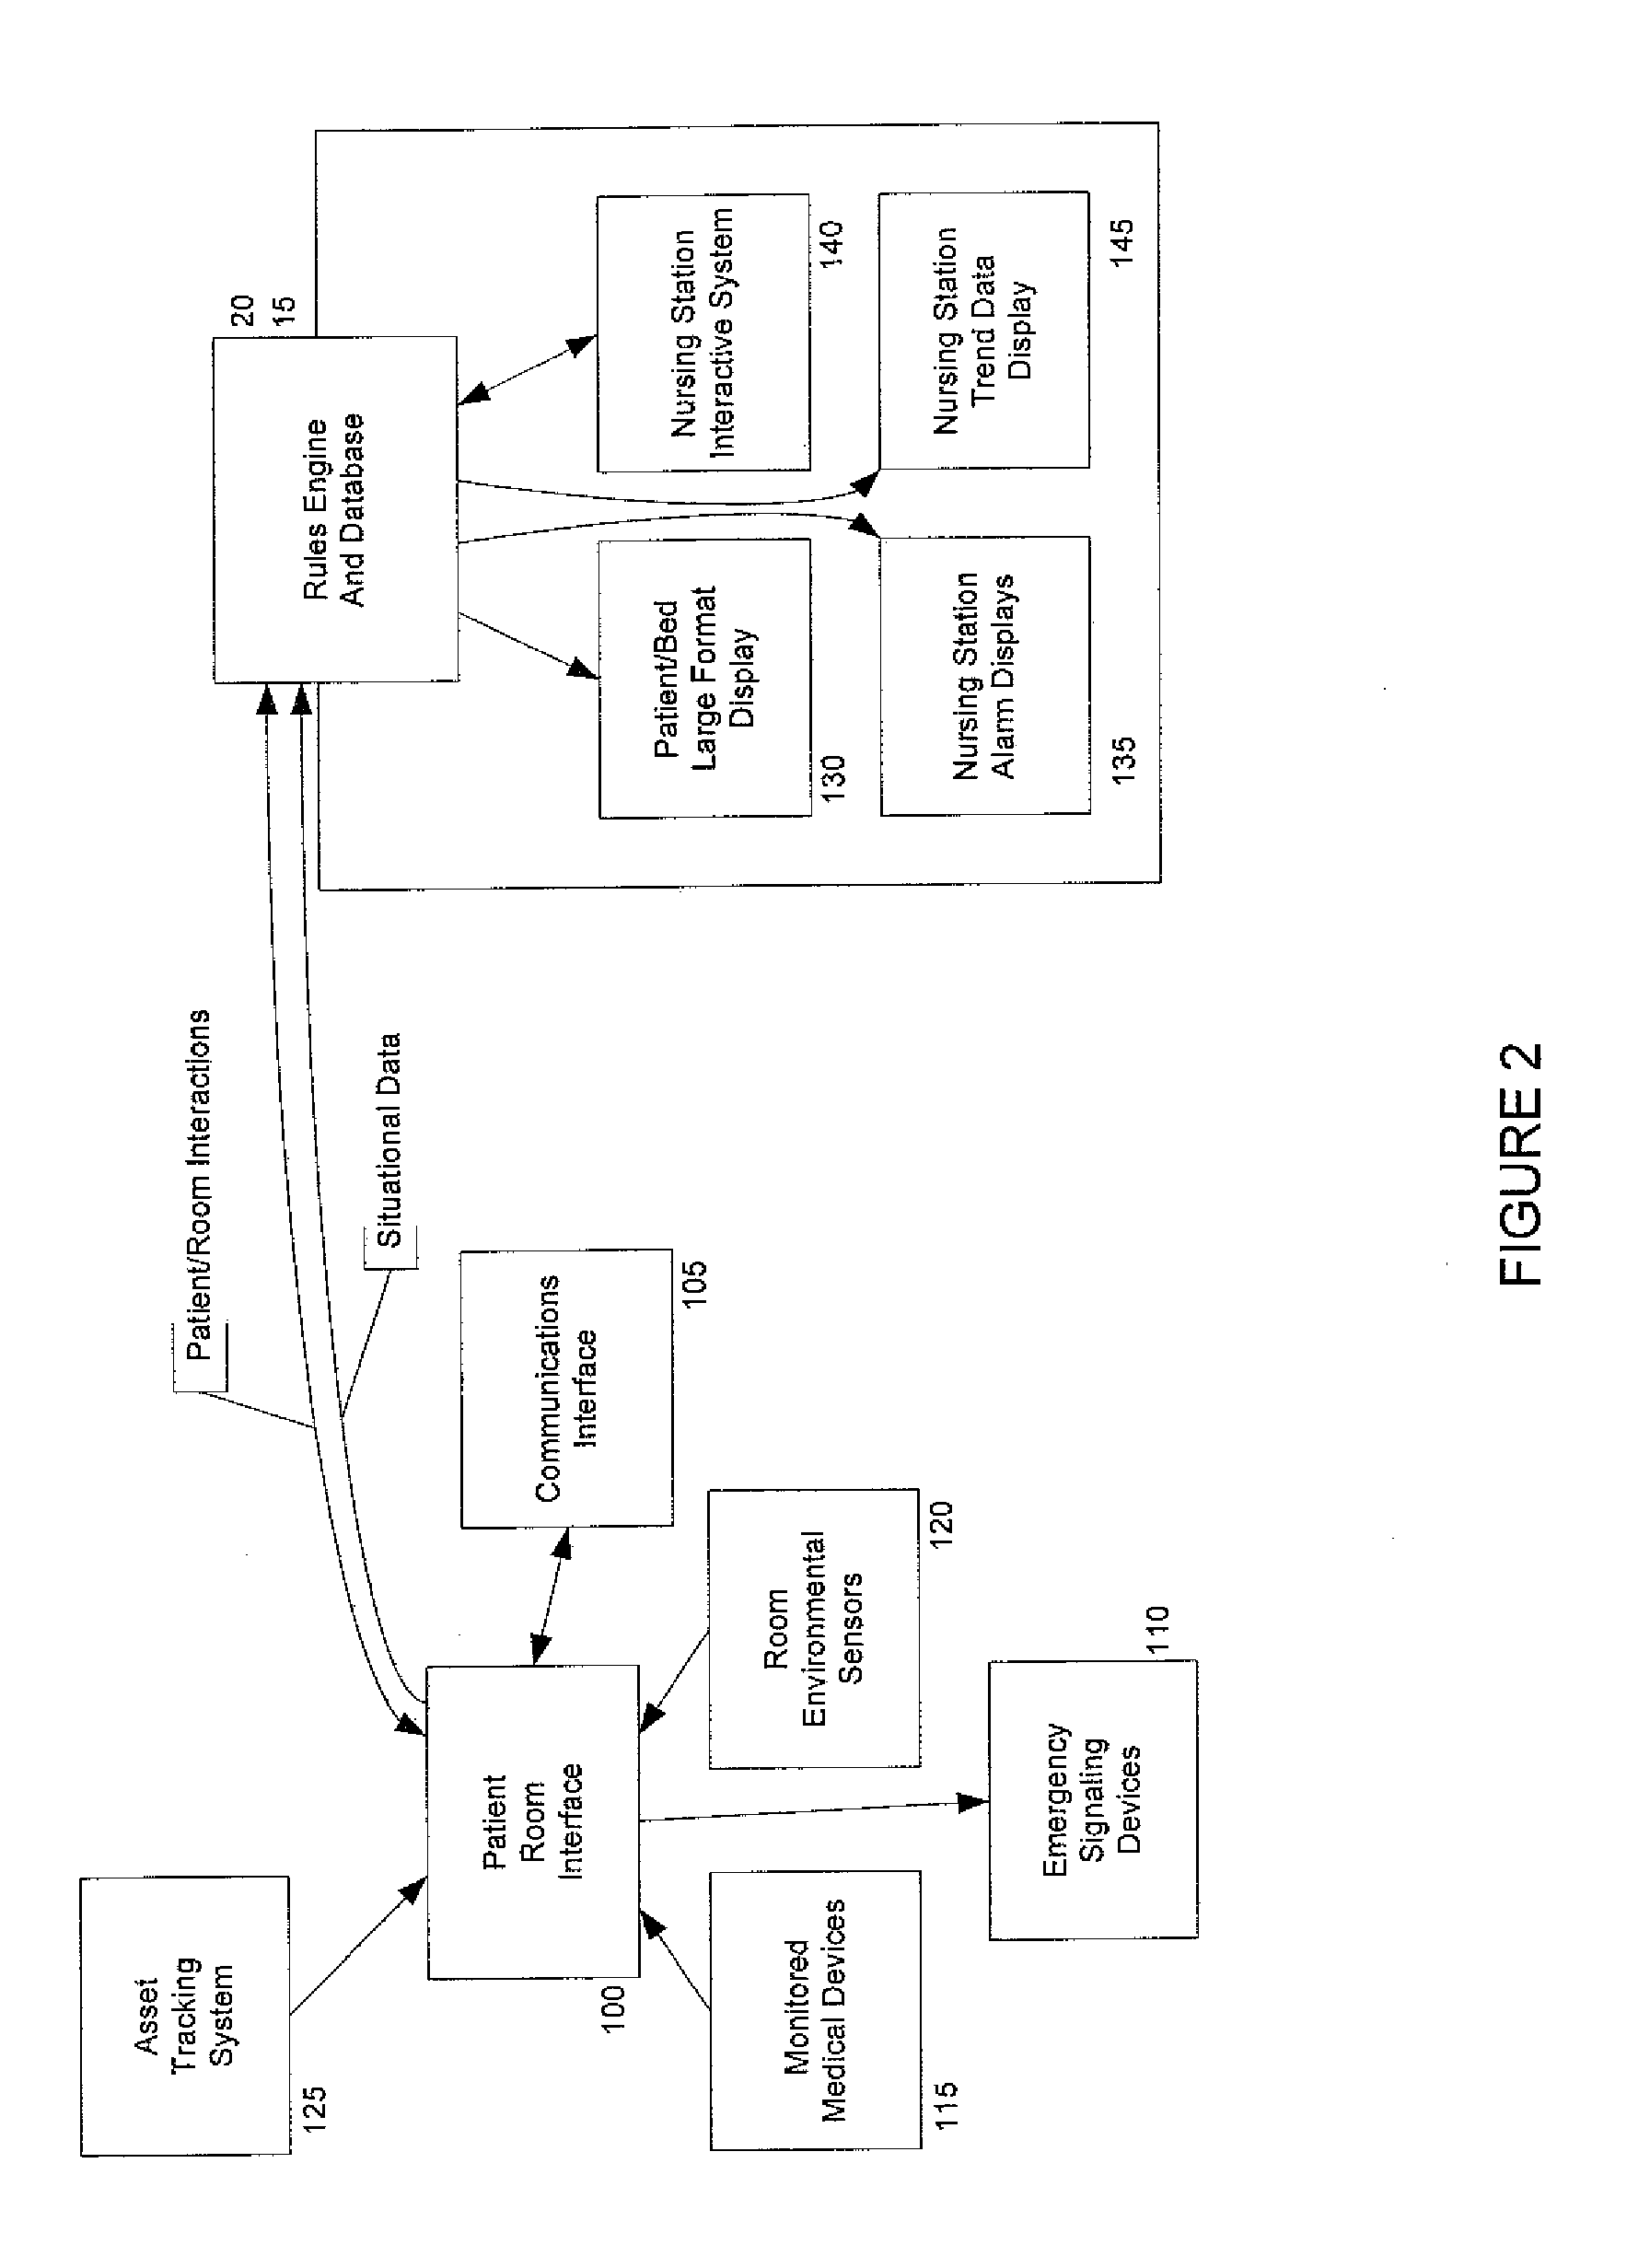 Healthcare communication and workflow management system and method